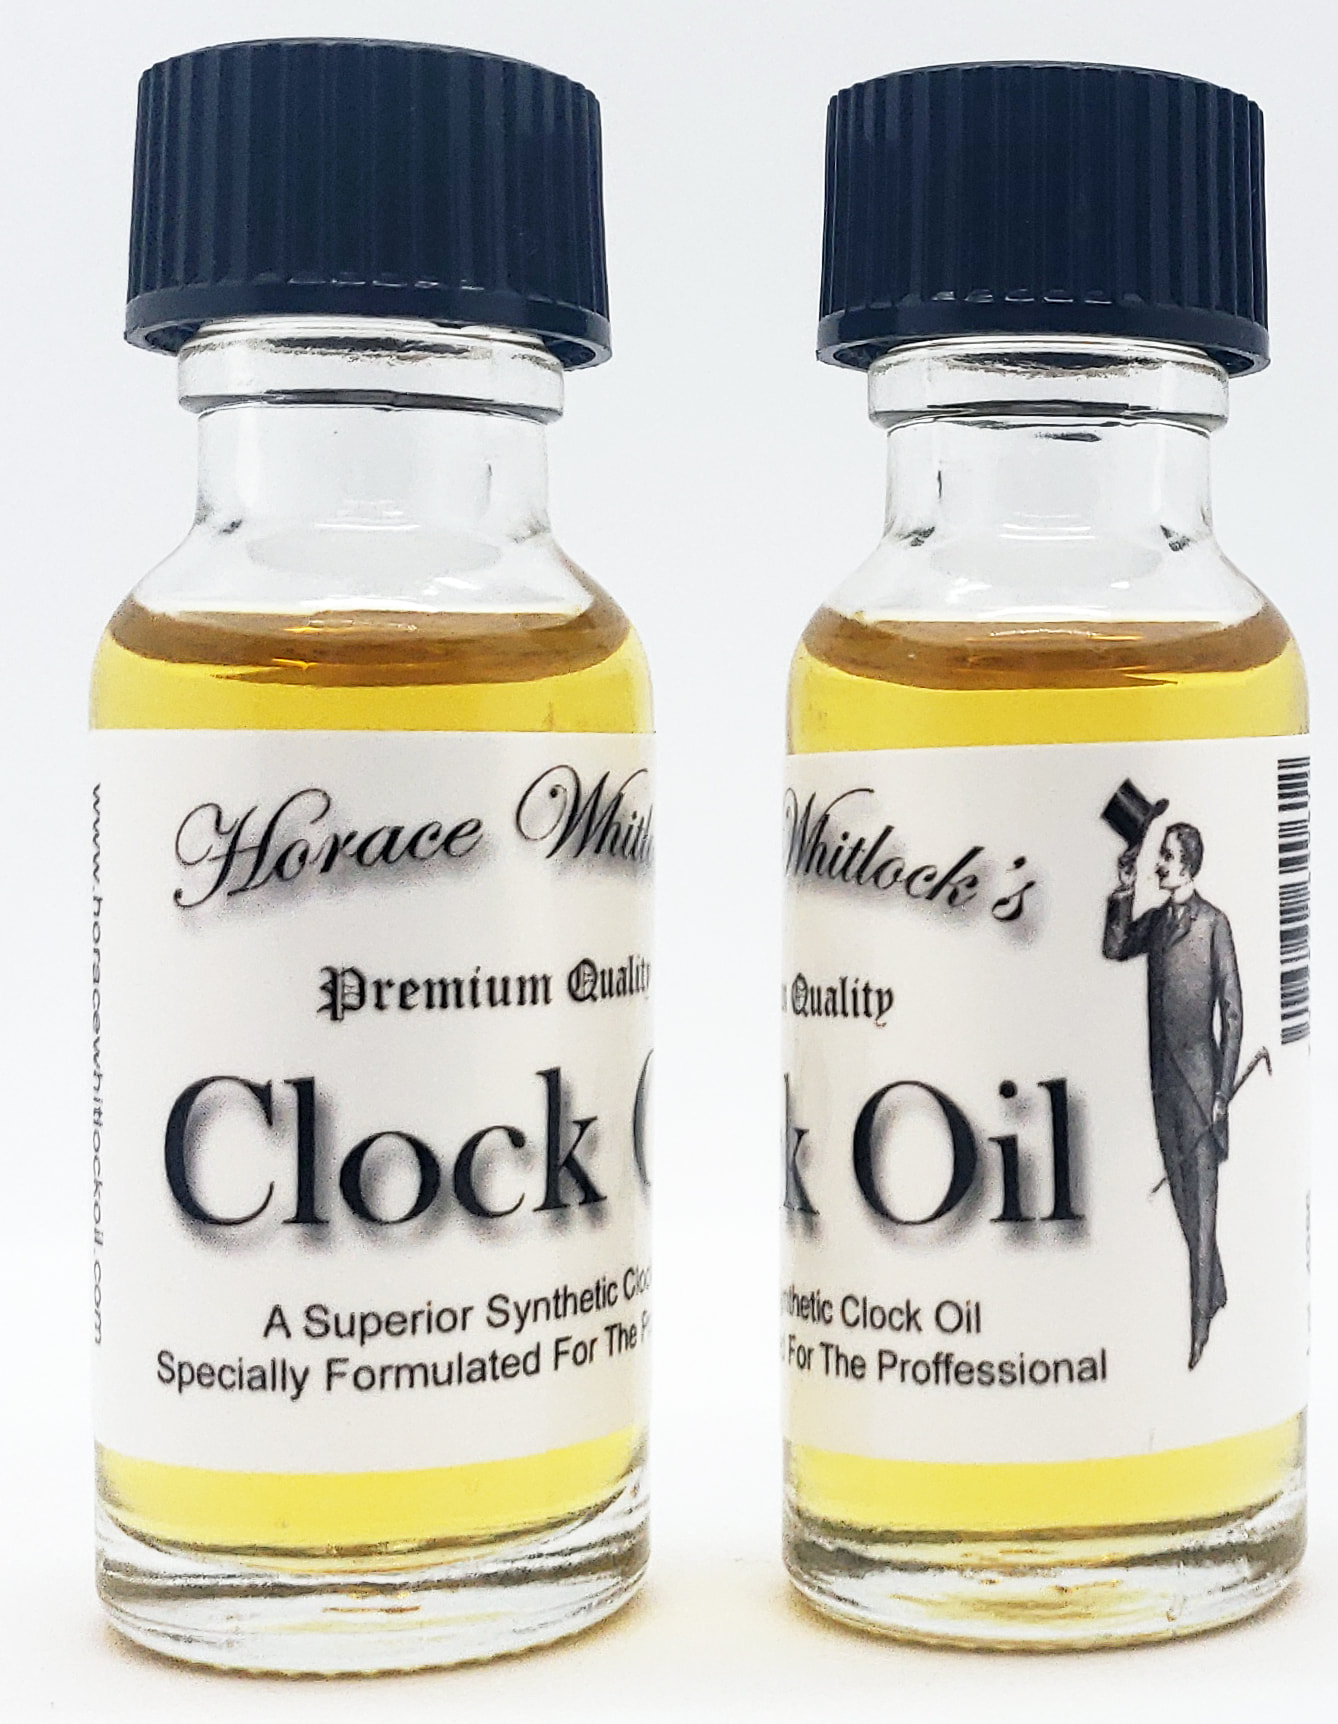  Horace Whitlock's Clock Oil 100%Synthetic Clock Oil : Automotive